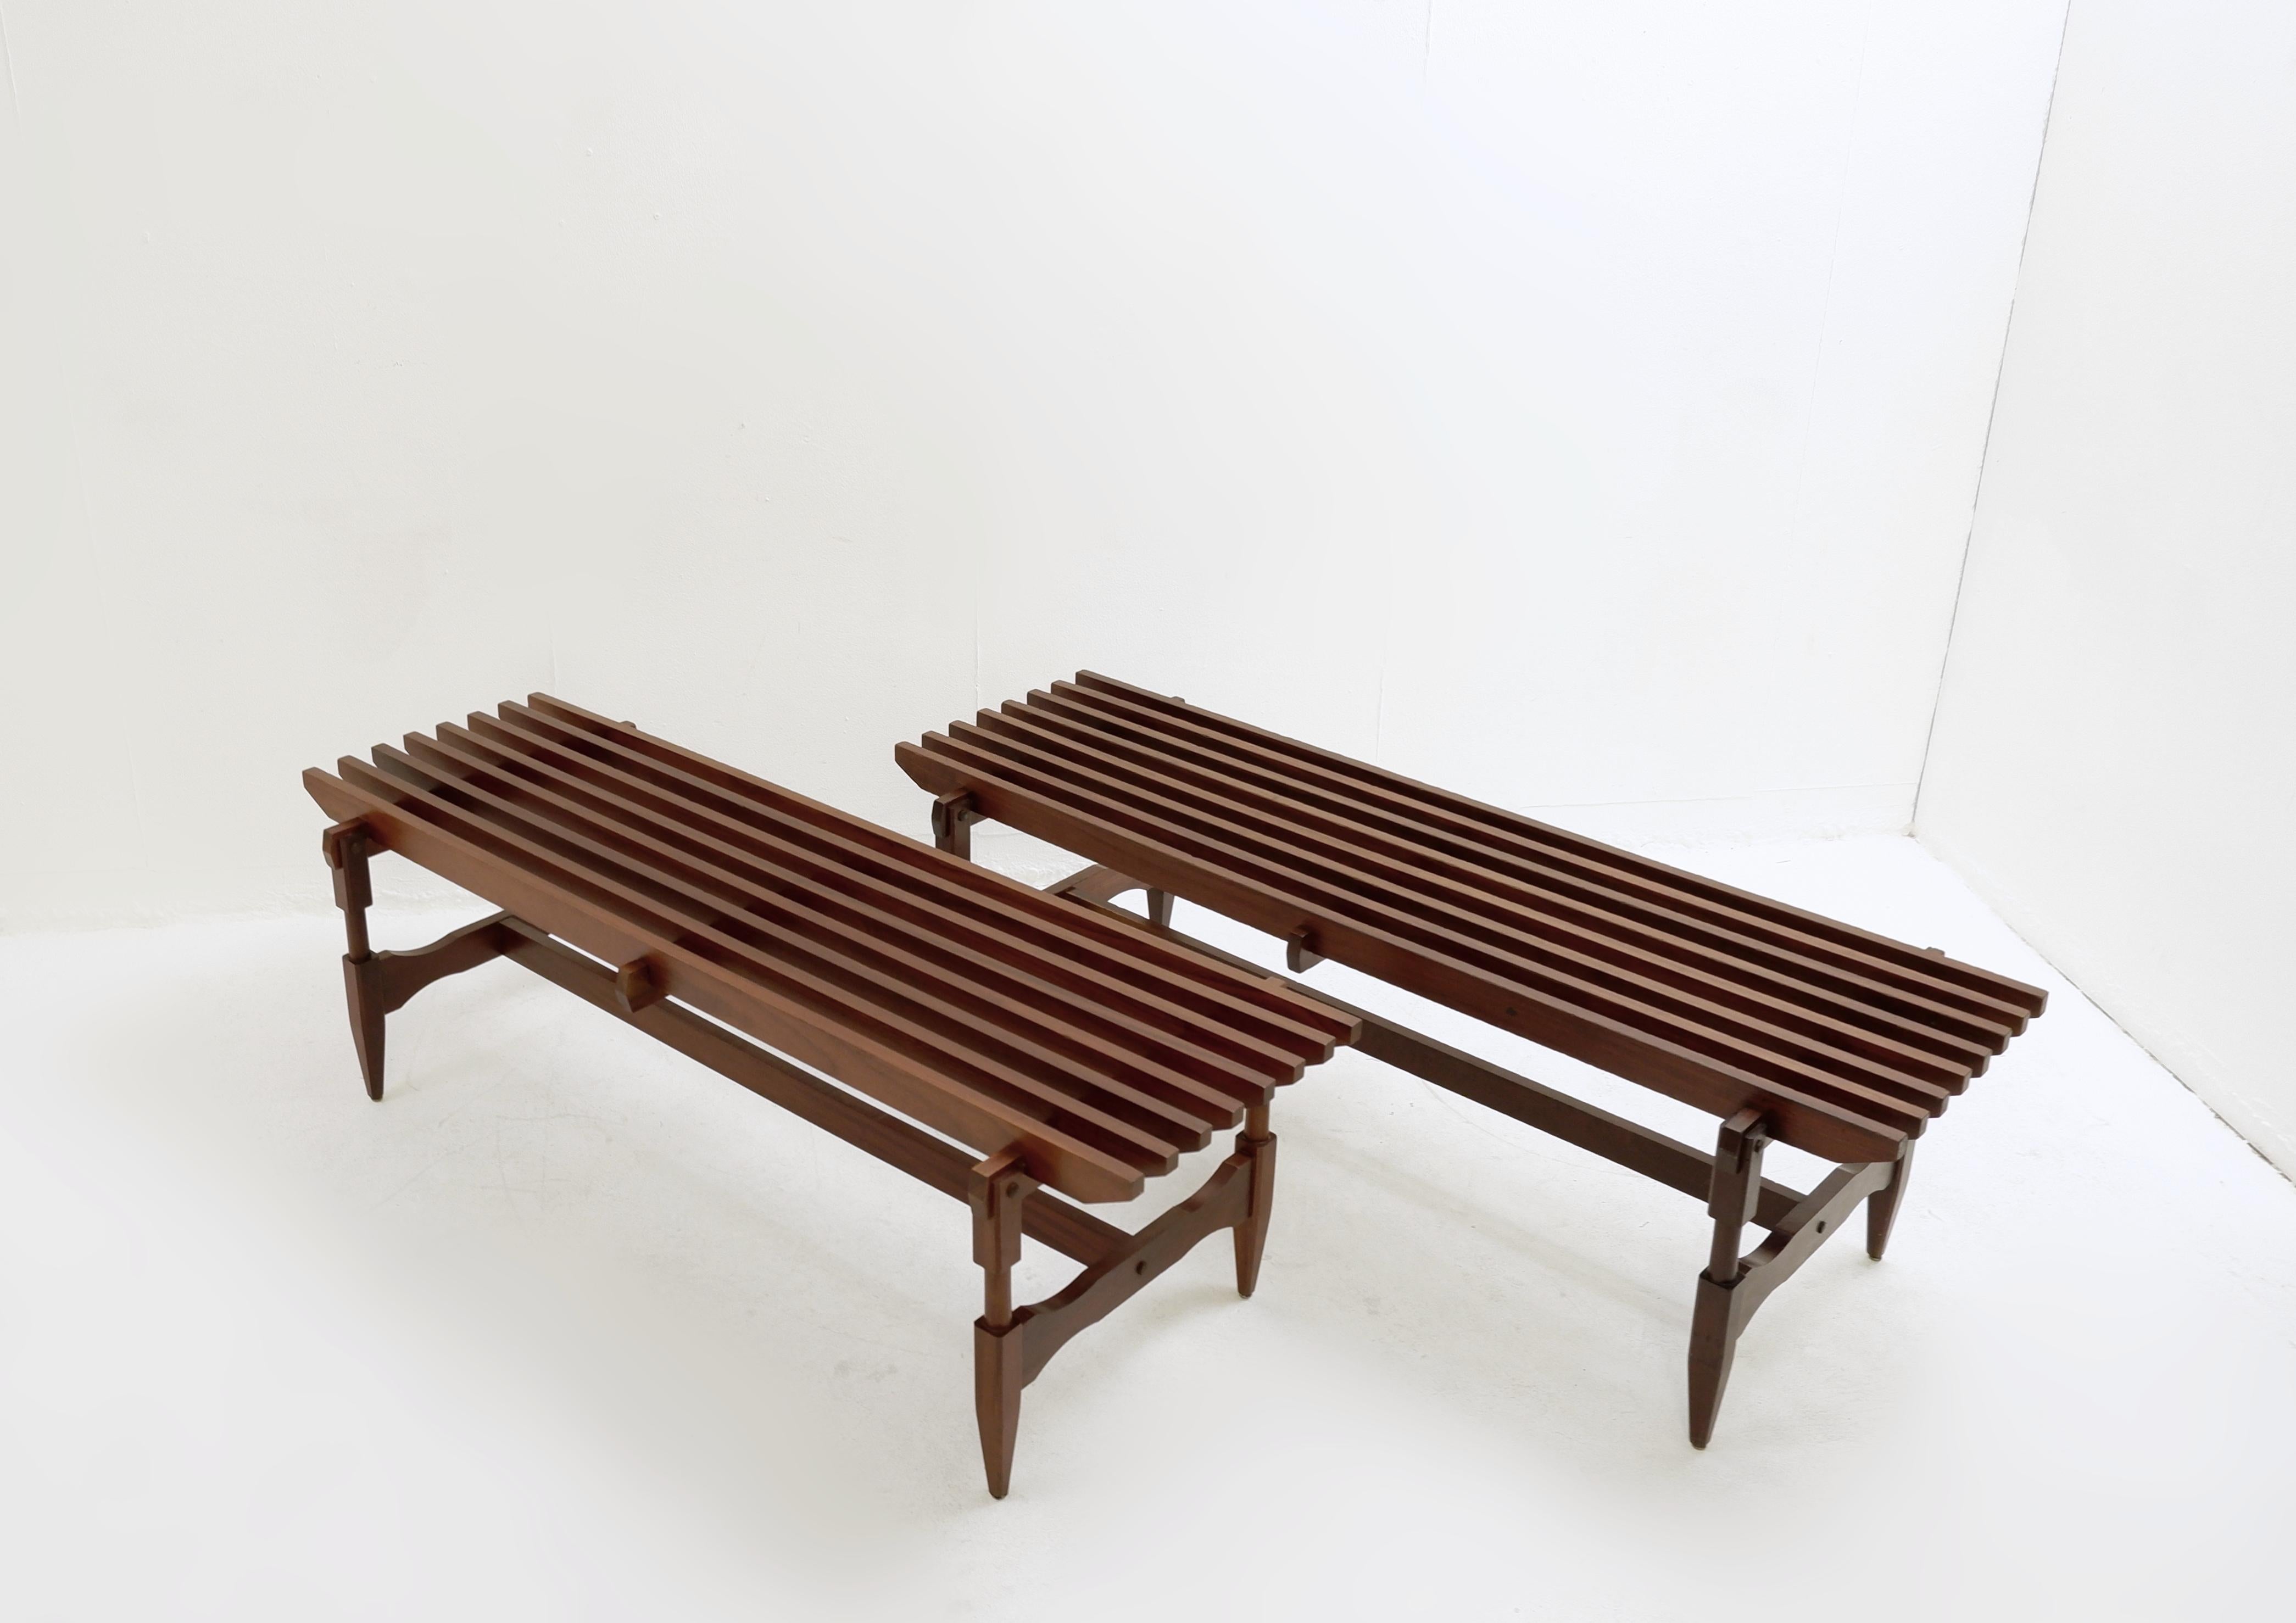 Italian Pair of Mid-century wood Bench by Ico & Luisa Parisi - 1950s For Sale